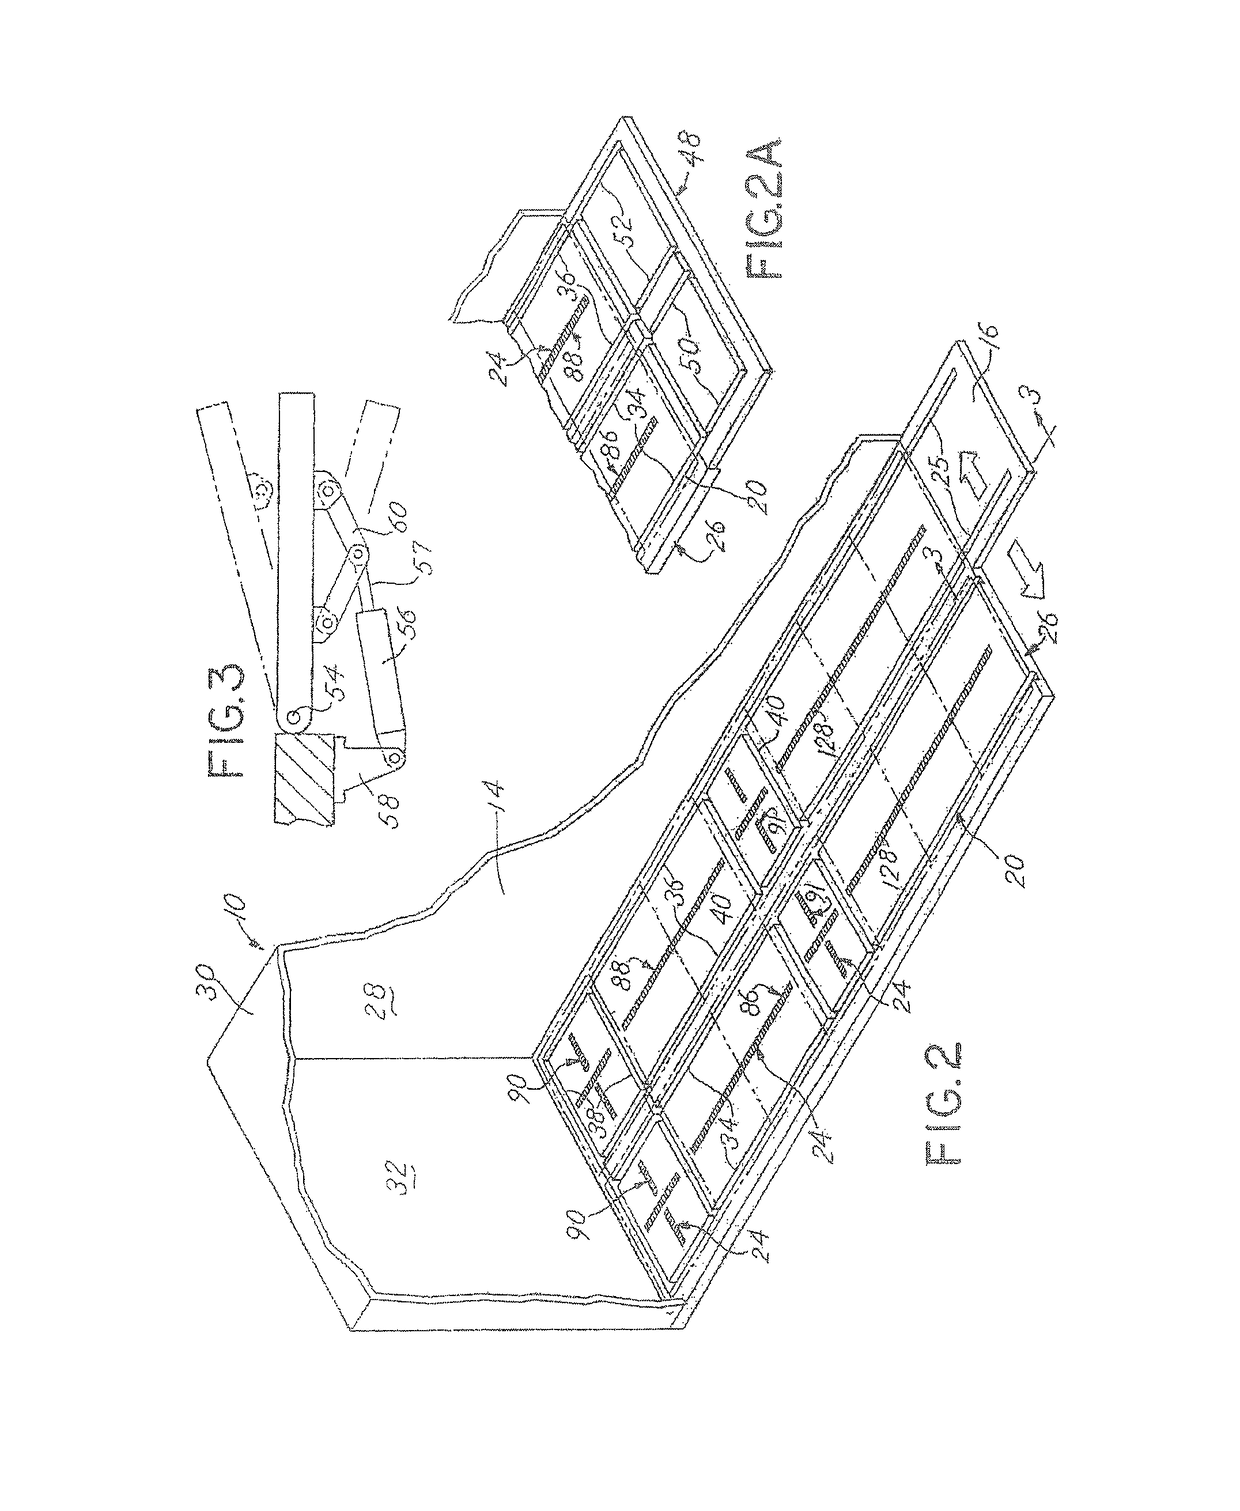 Apparatus and system for facilitating loading and unloading cargo from cargo spaces of vehicles